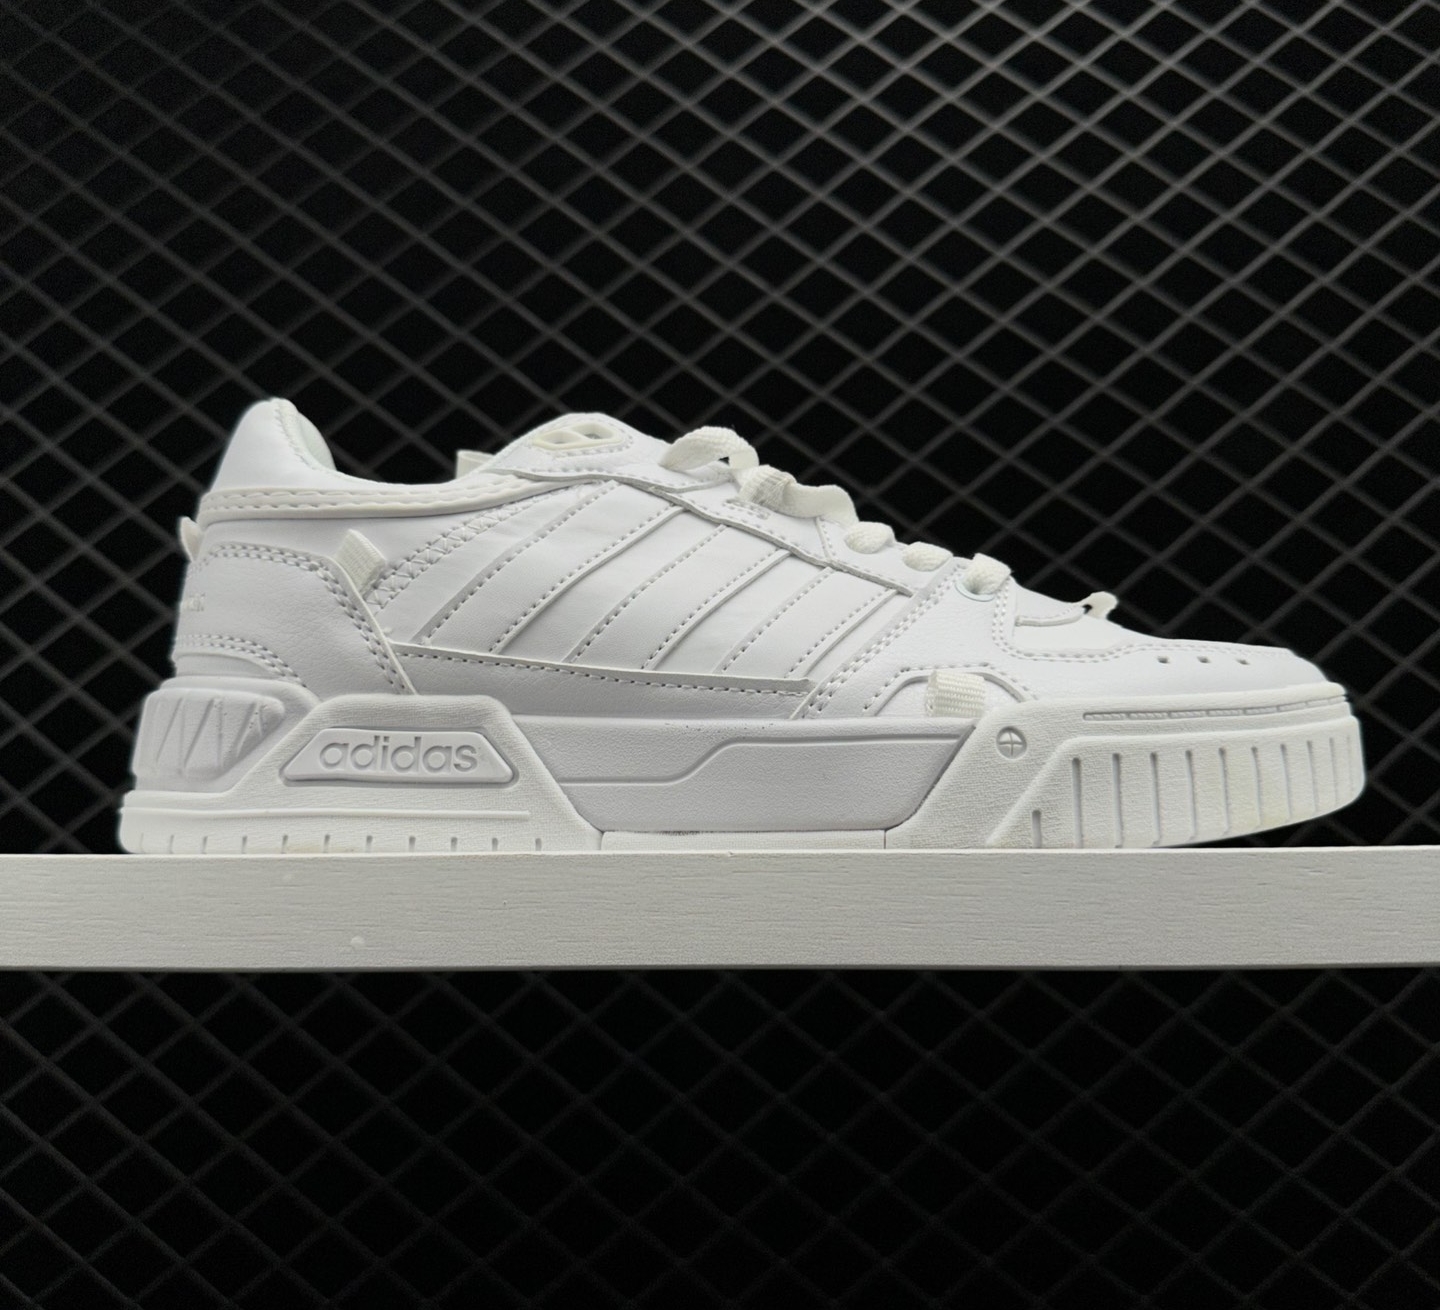 Adidas Neo D-PAD Lifestyle Shoes 'Cloud White' IG7588 - Stylish and Comfortable Footwear